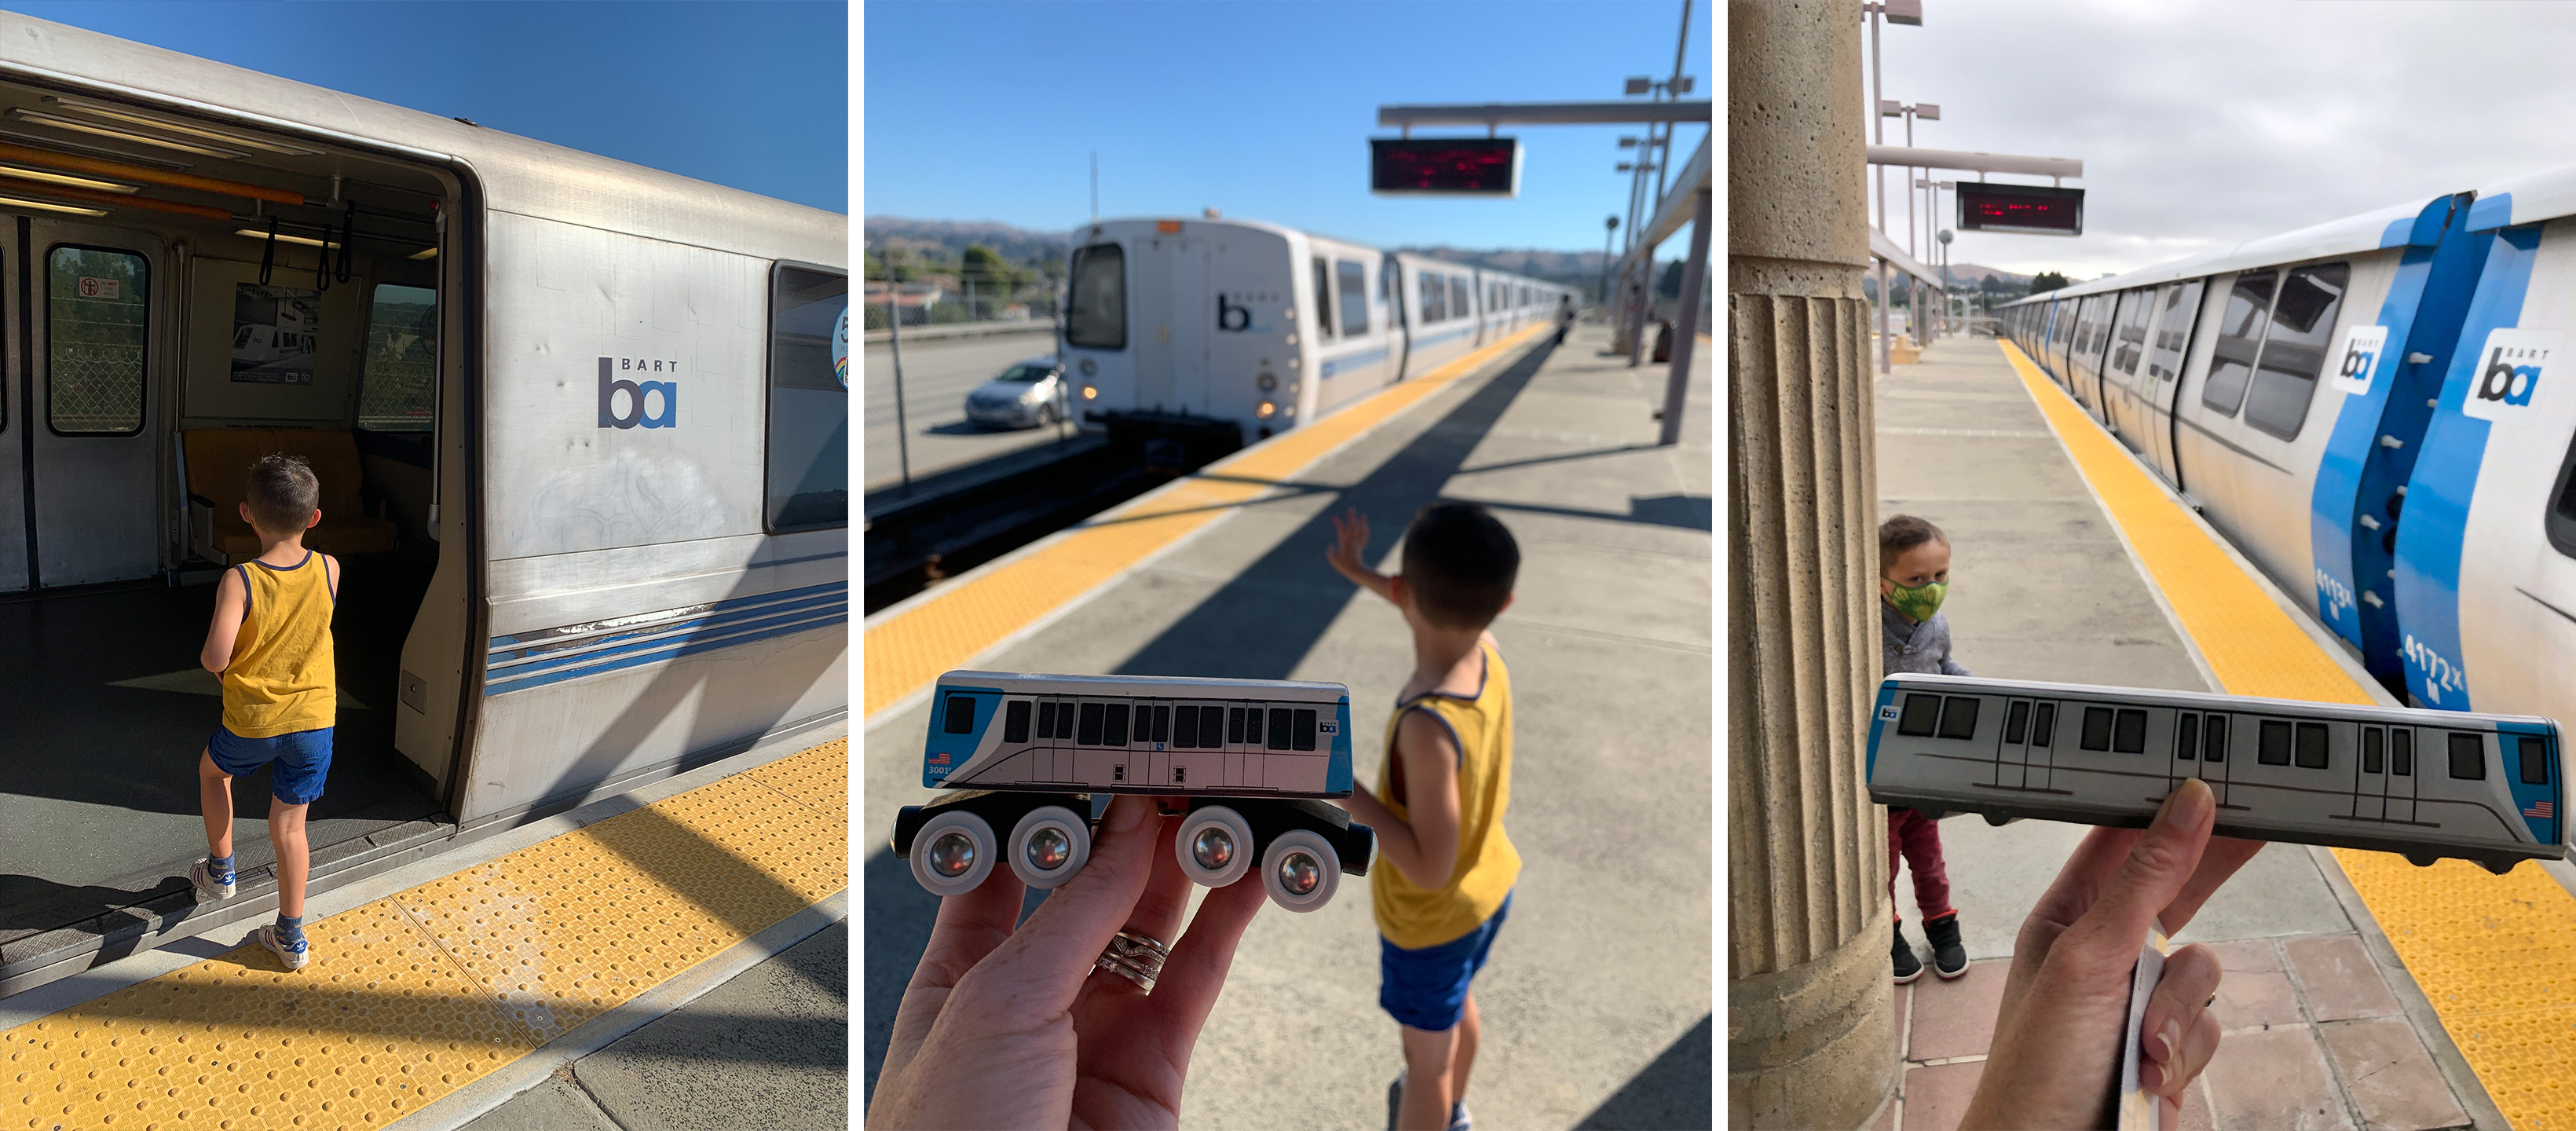 Bryce at a BART station, getting on a train. Train toys in the foreground.